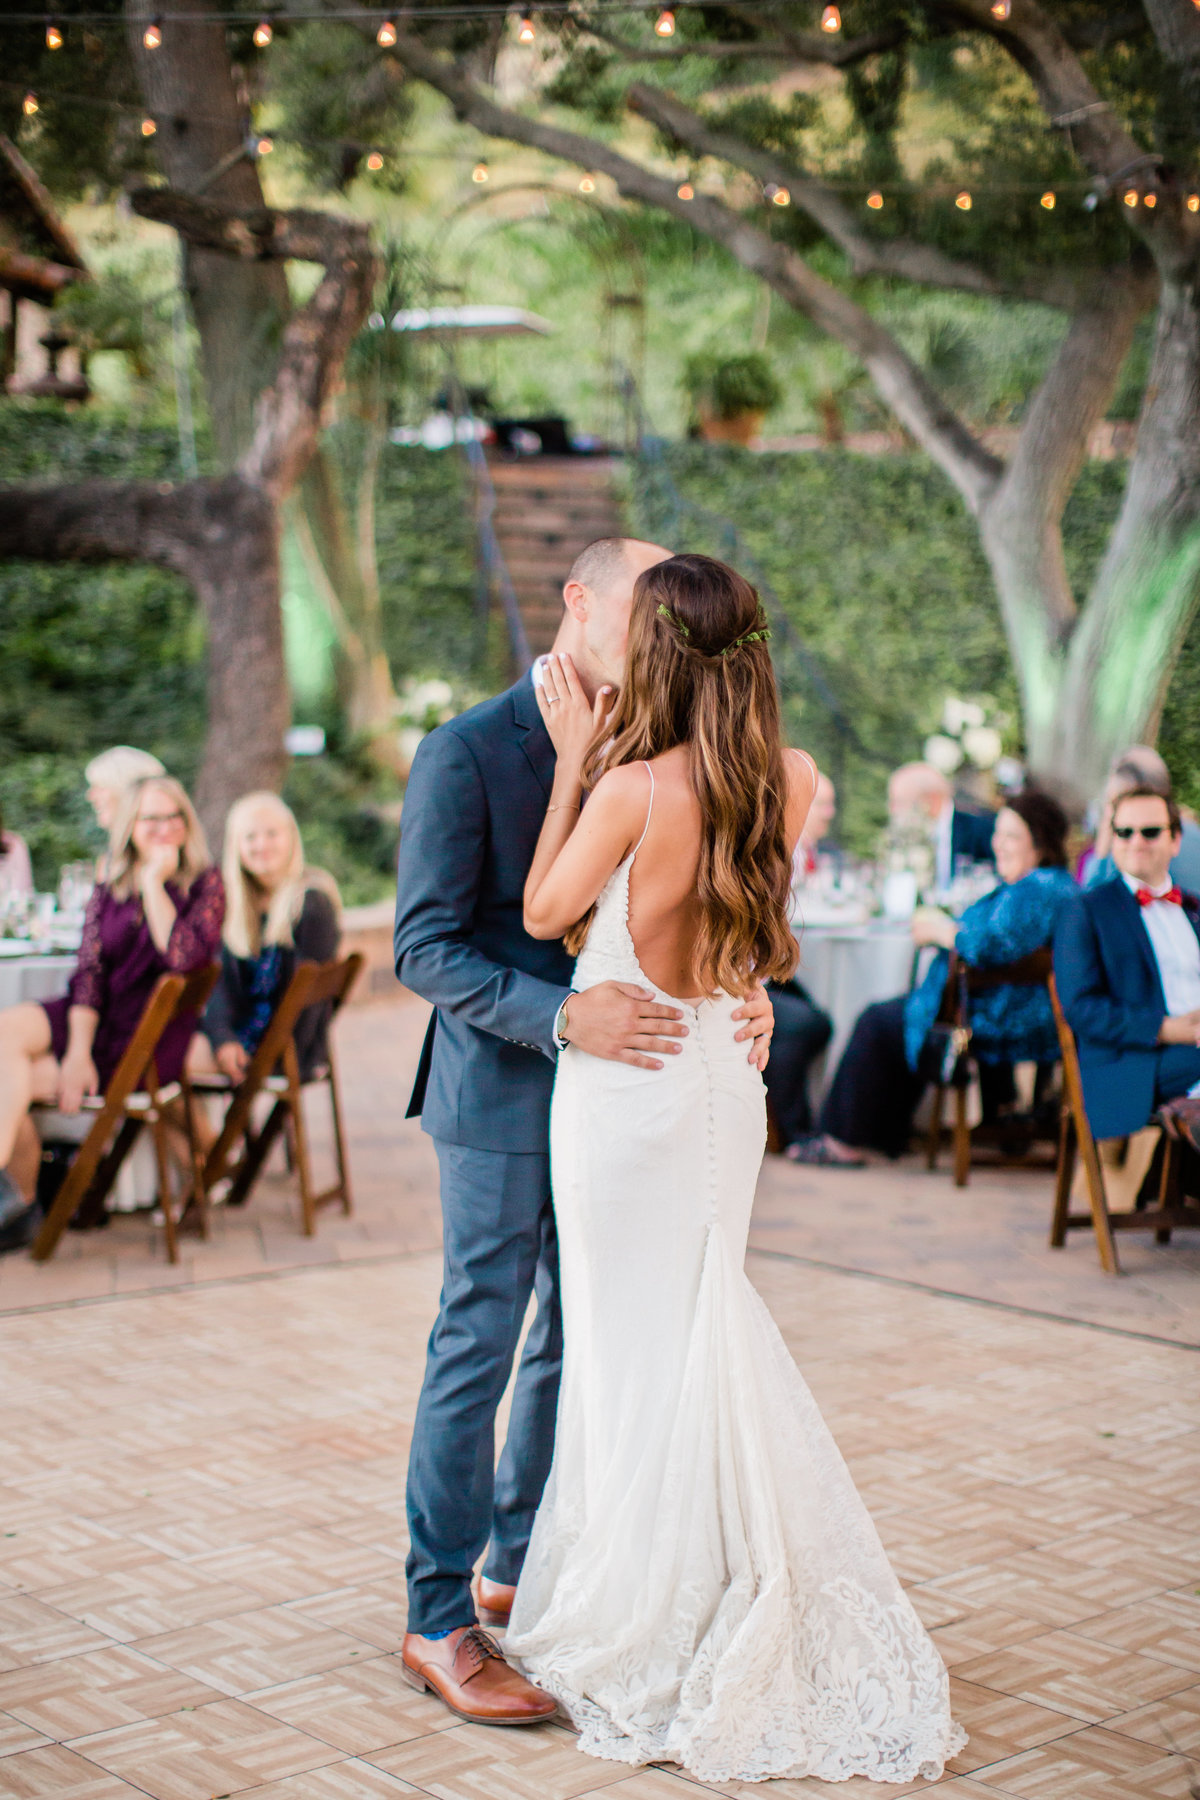 Paige & Thomas are Married| Circle Oak Ranch Wedding | Katie Schoepflin Photography741